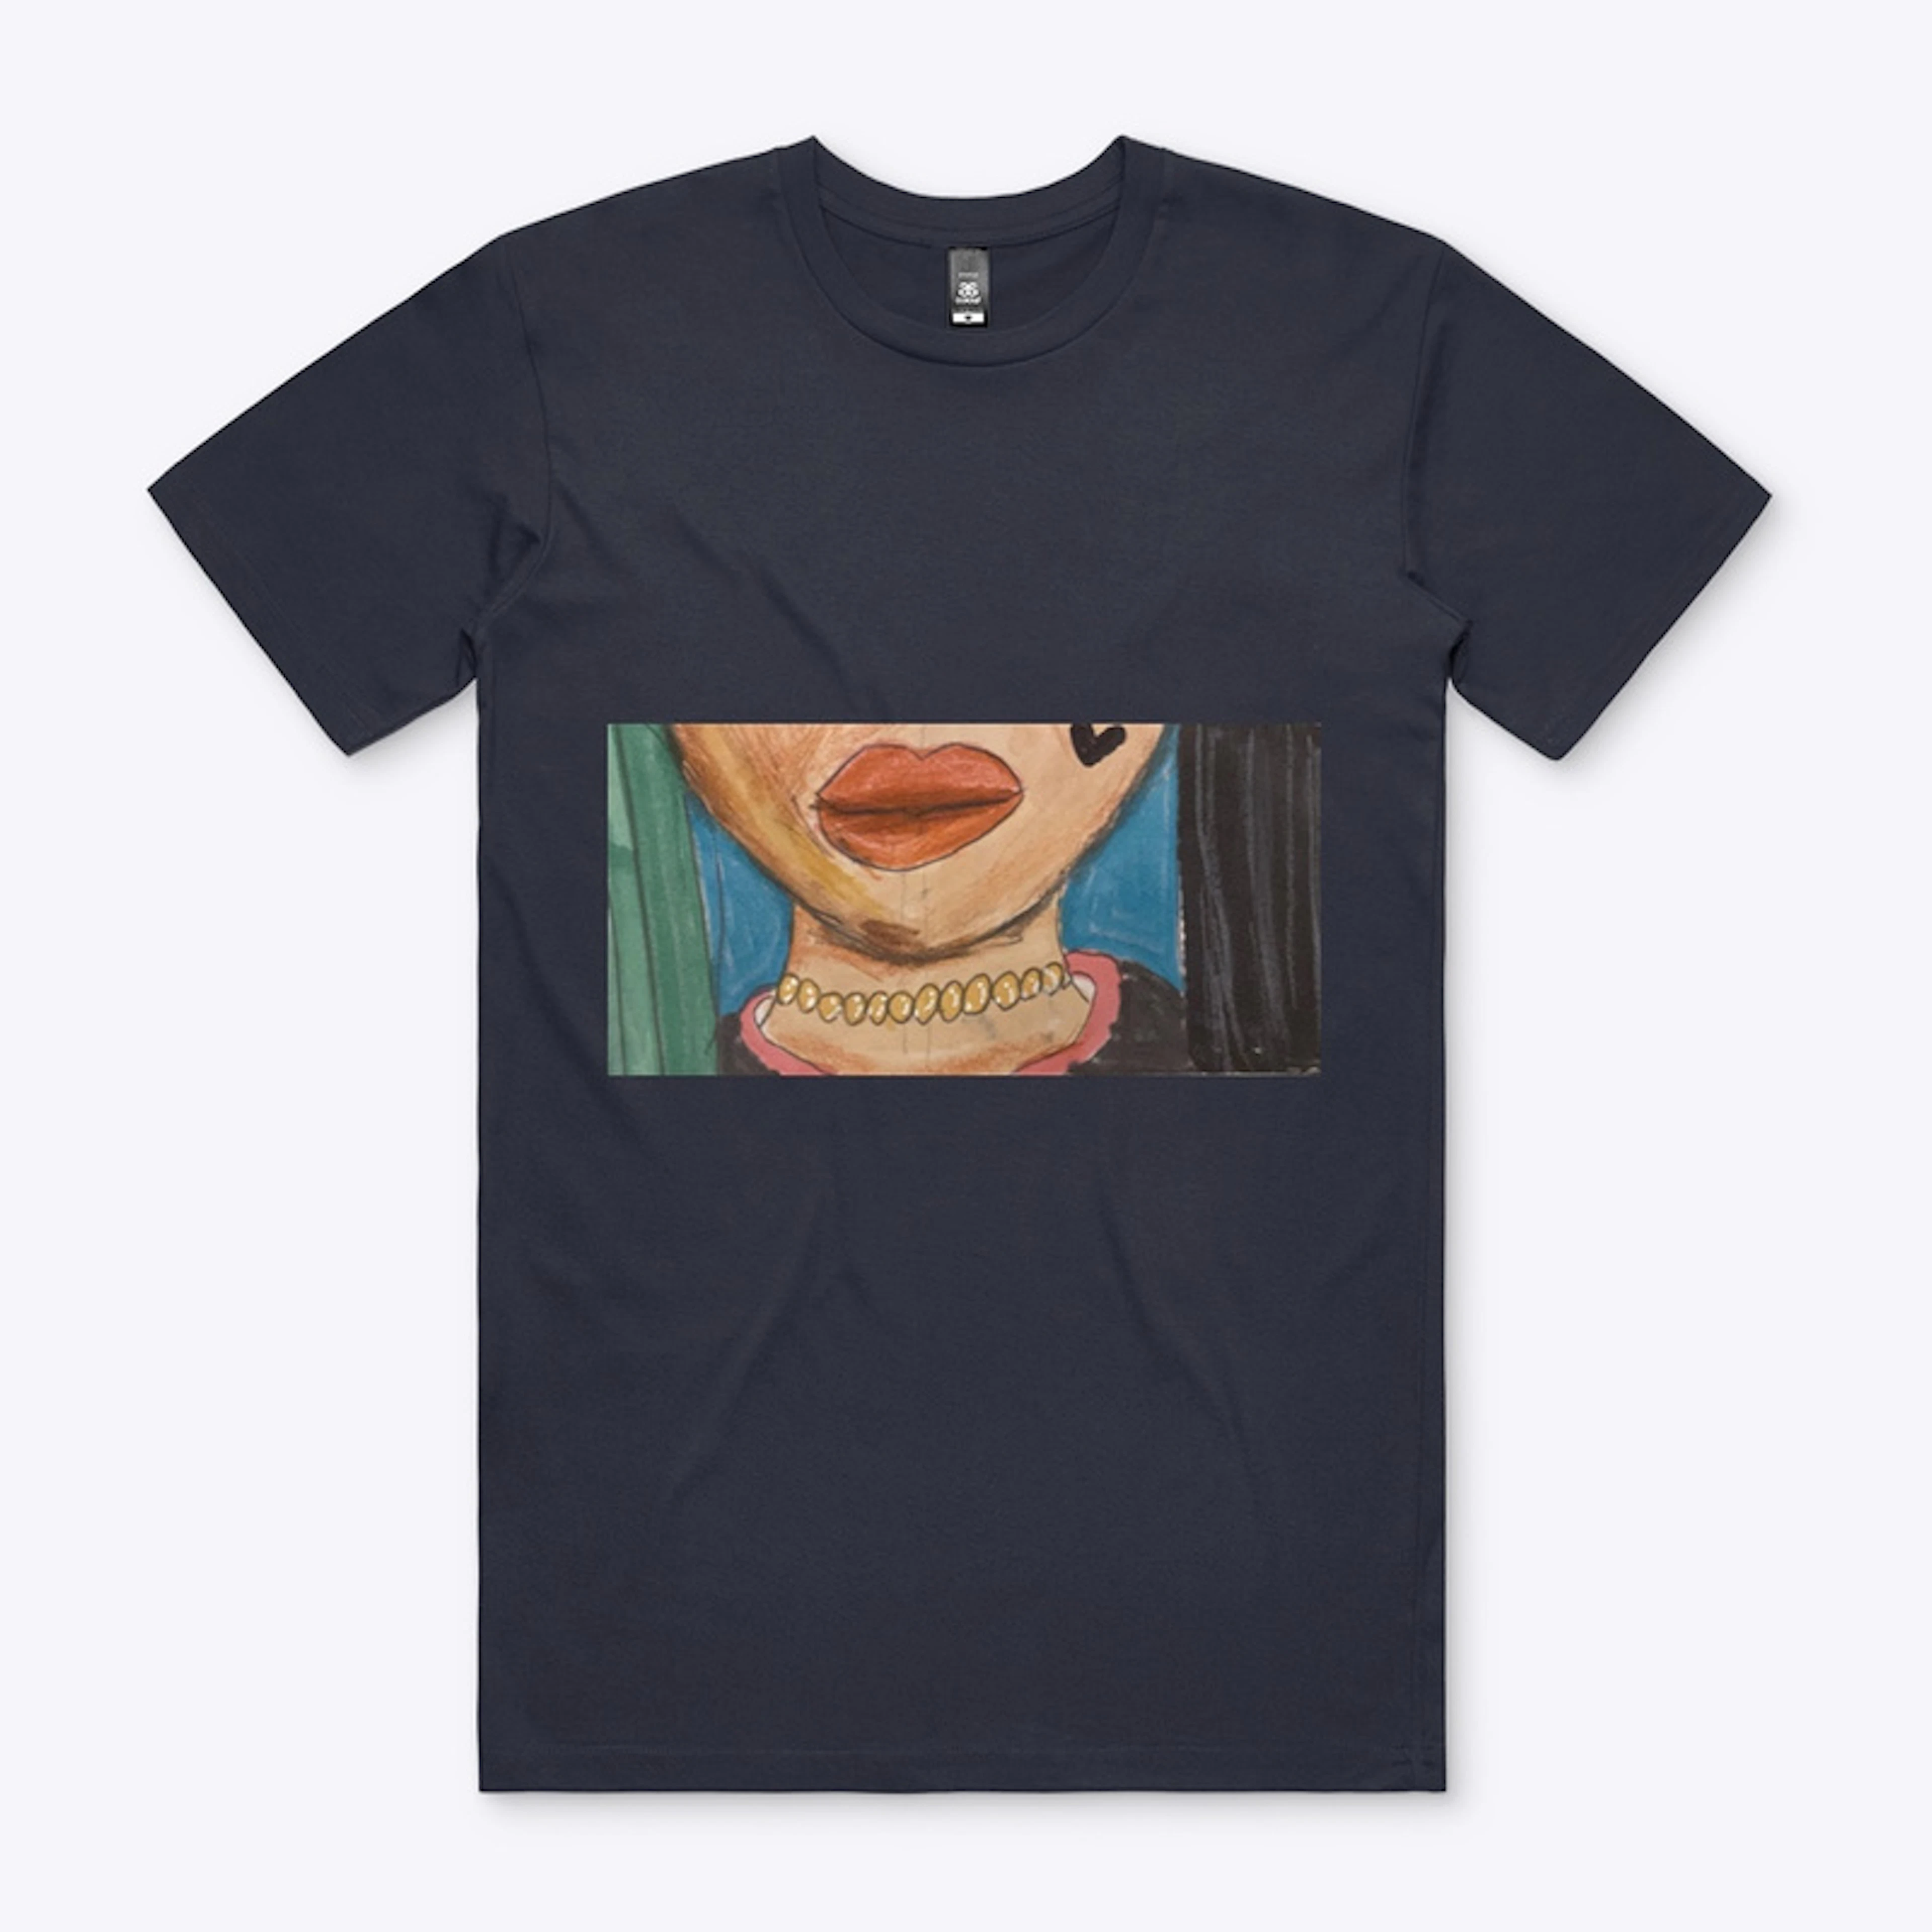 She’s Munchy Essential Tee